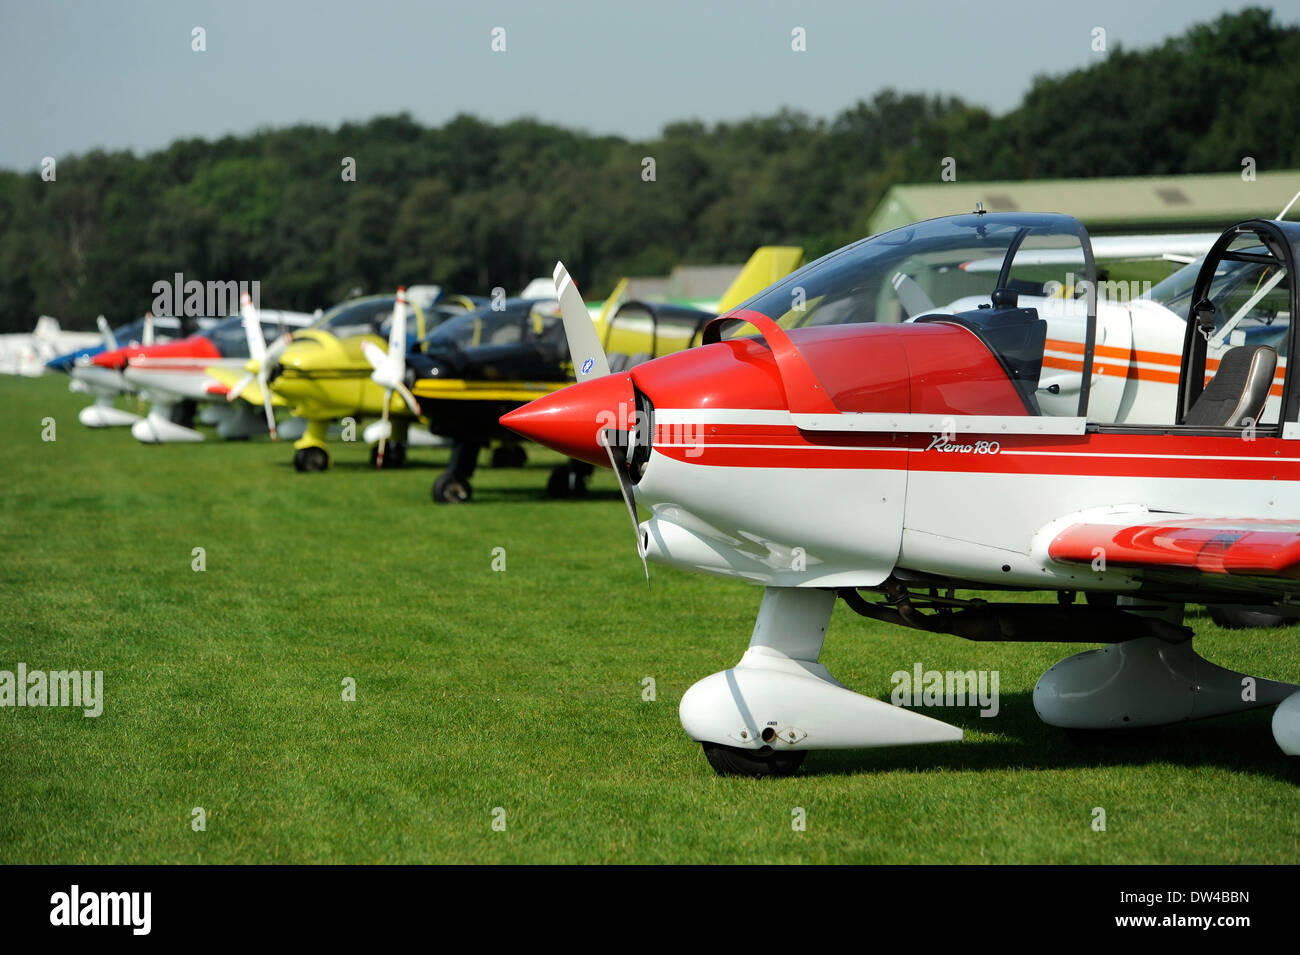 Line of tug planes at a gliding competition Stock Photo